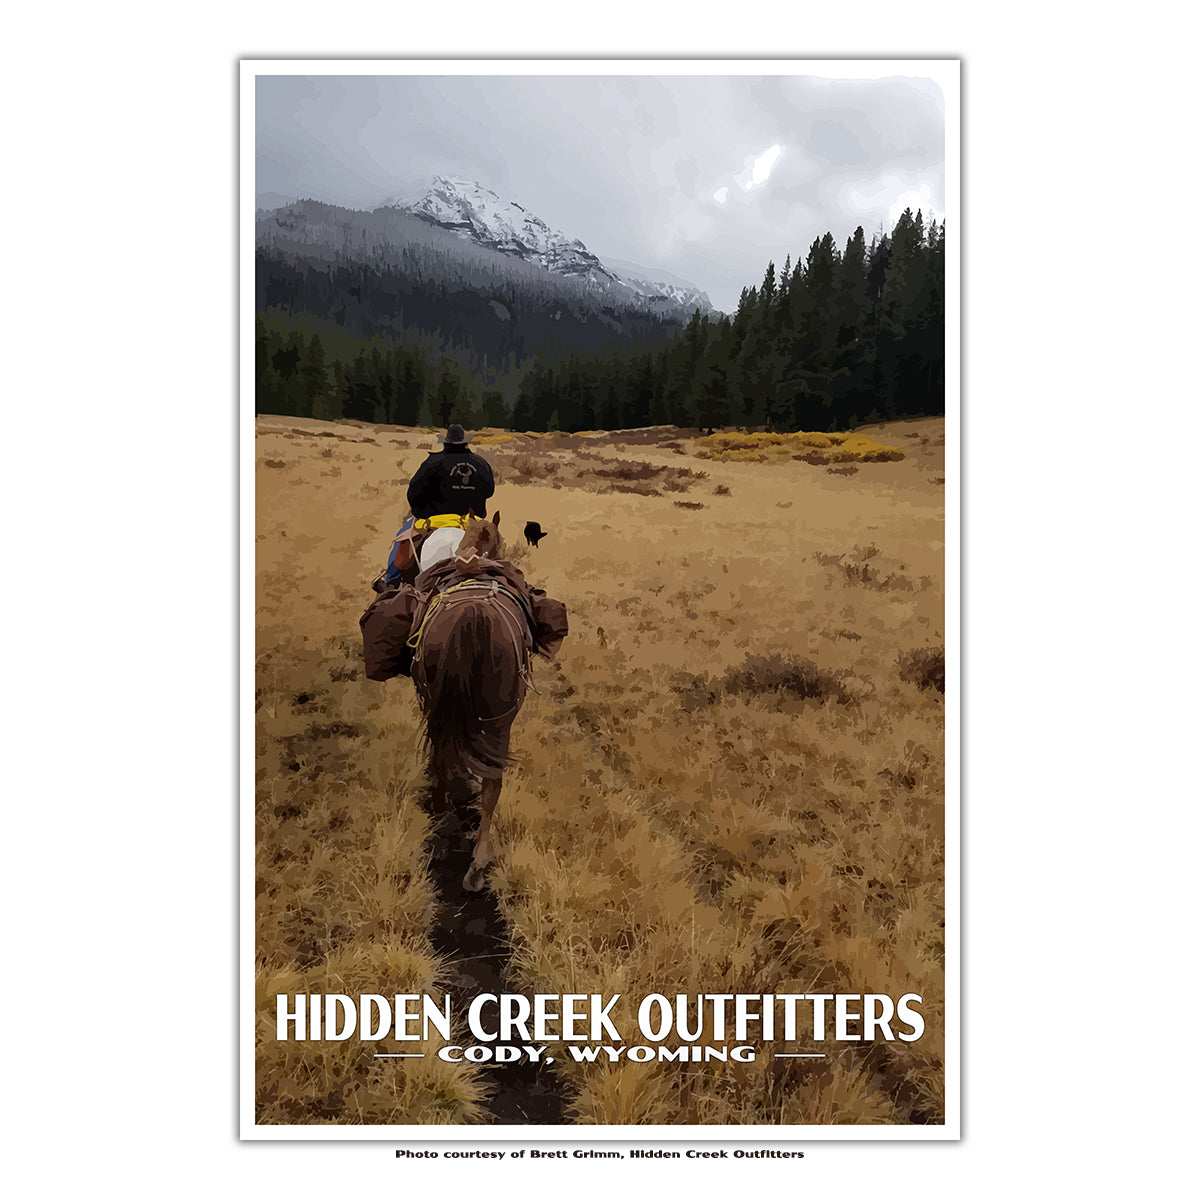 Hidden Creek Outfitters, Cody Wyoming custom travel poster